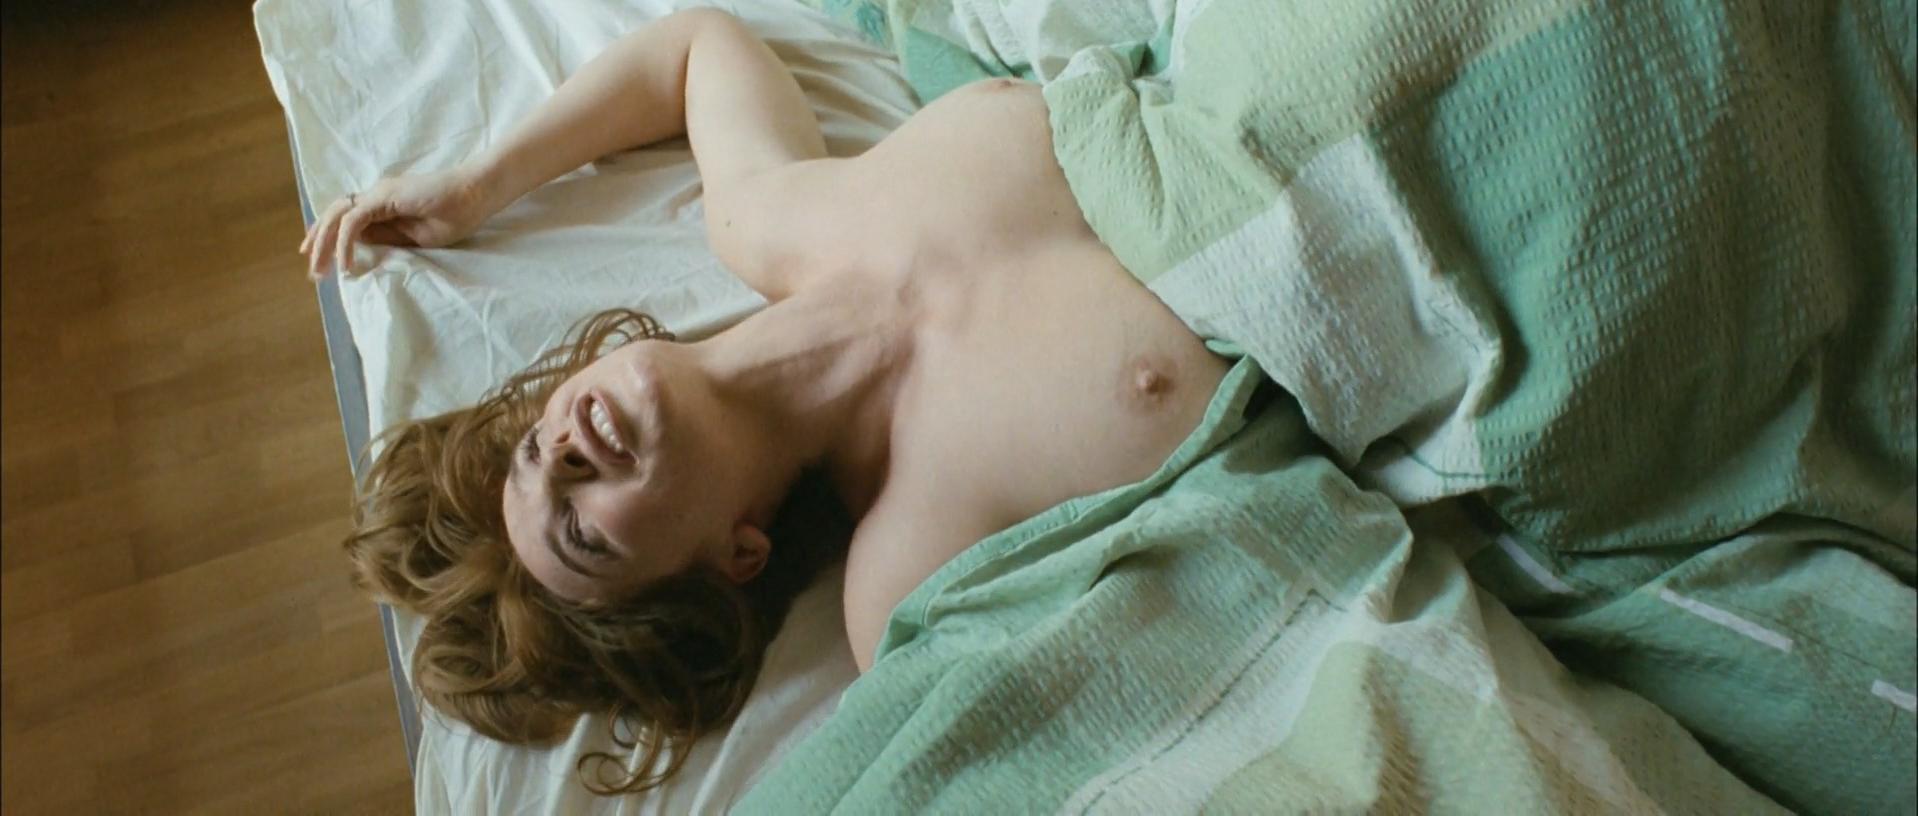 Vica Kerekes in the clip is seen laid on the couch being nude with her male...